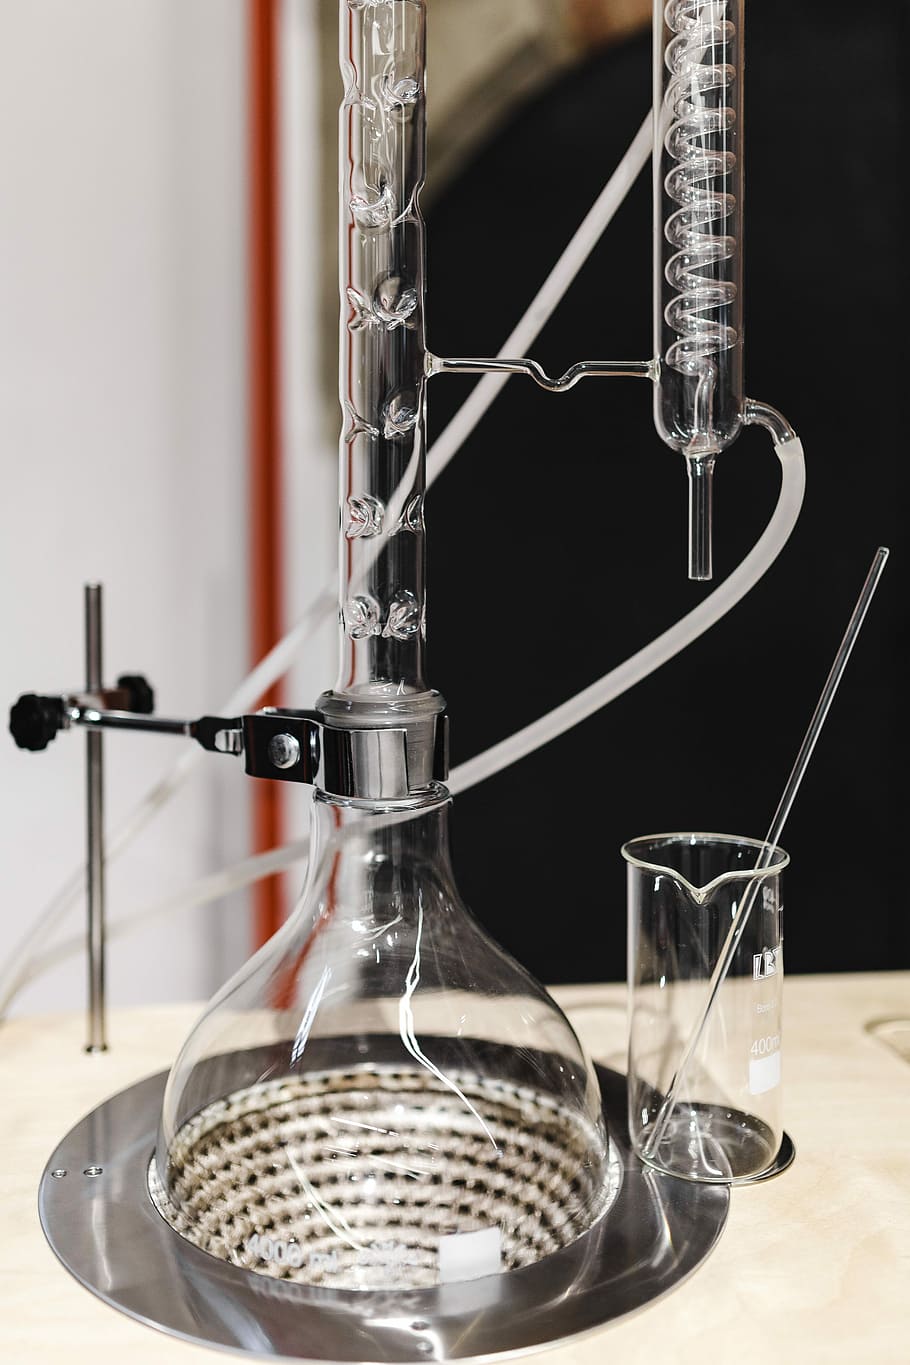 Glass distillation equipment, experiment, chemistry, chemical